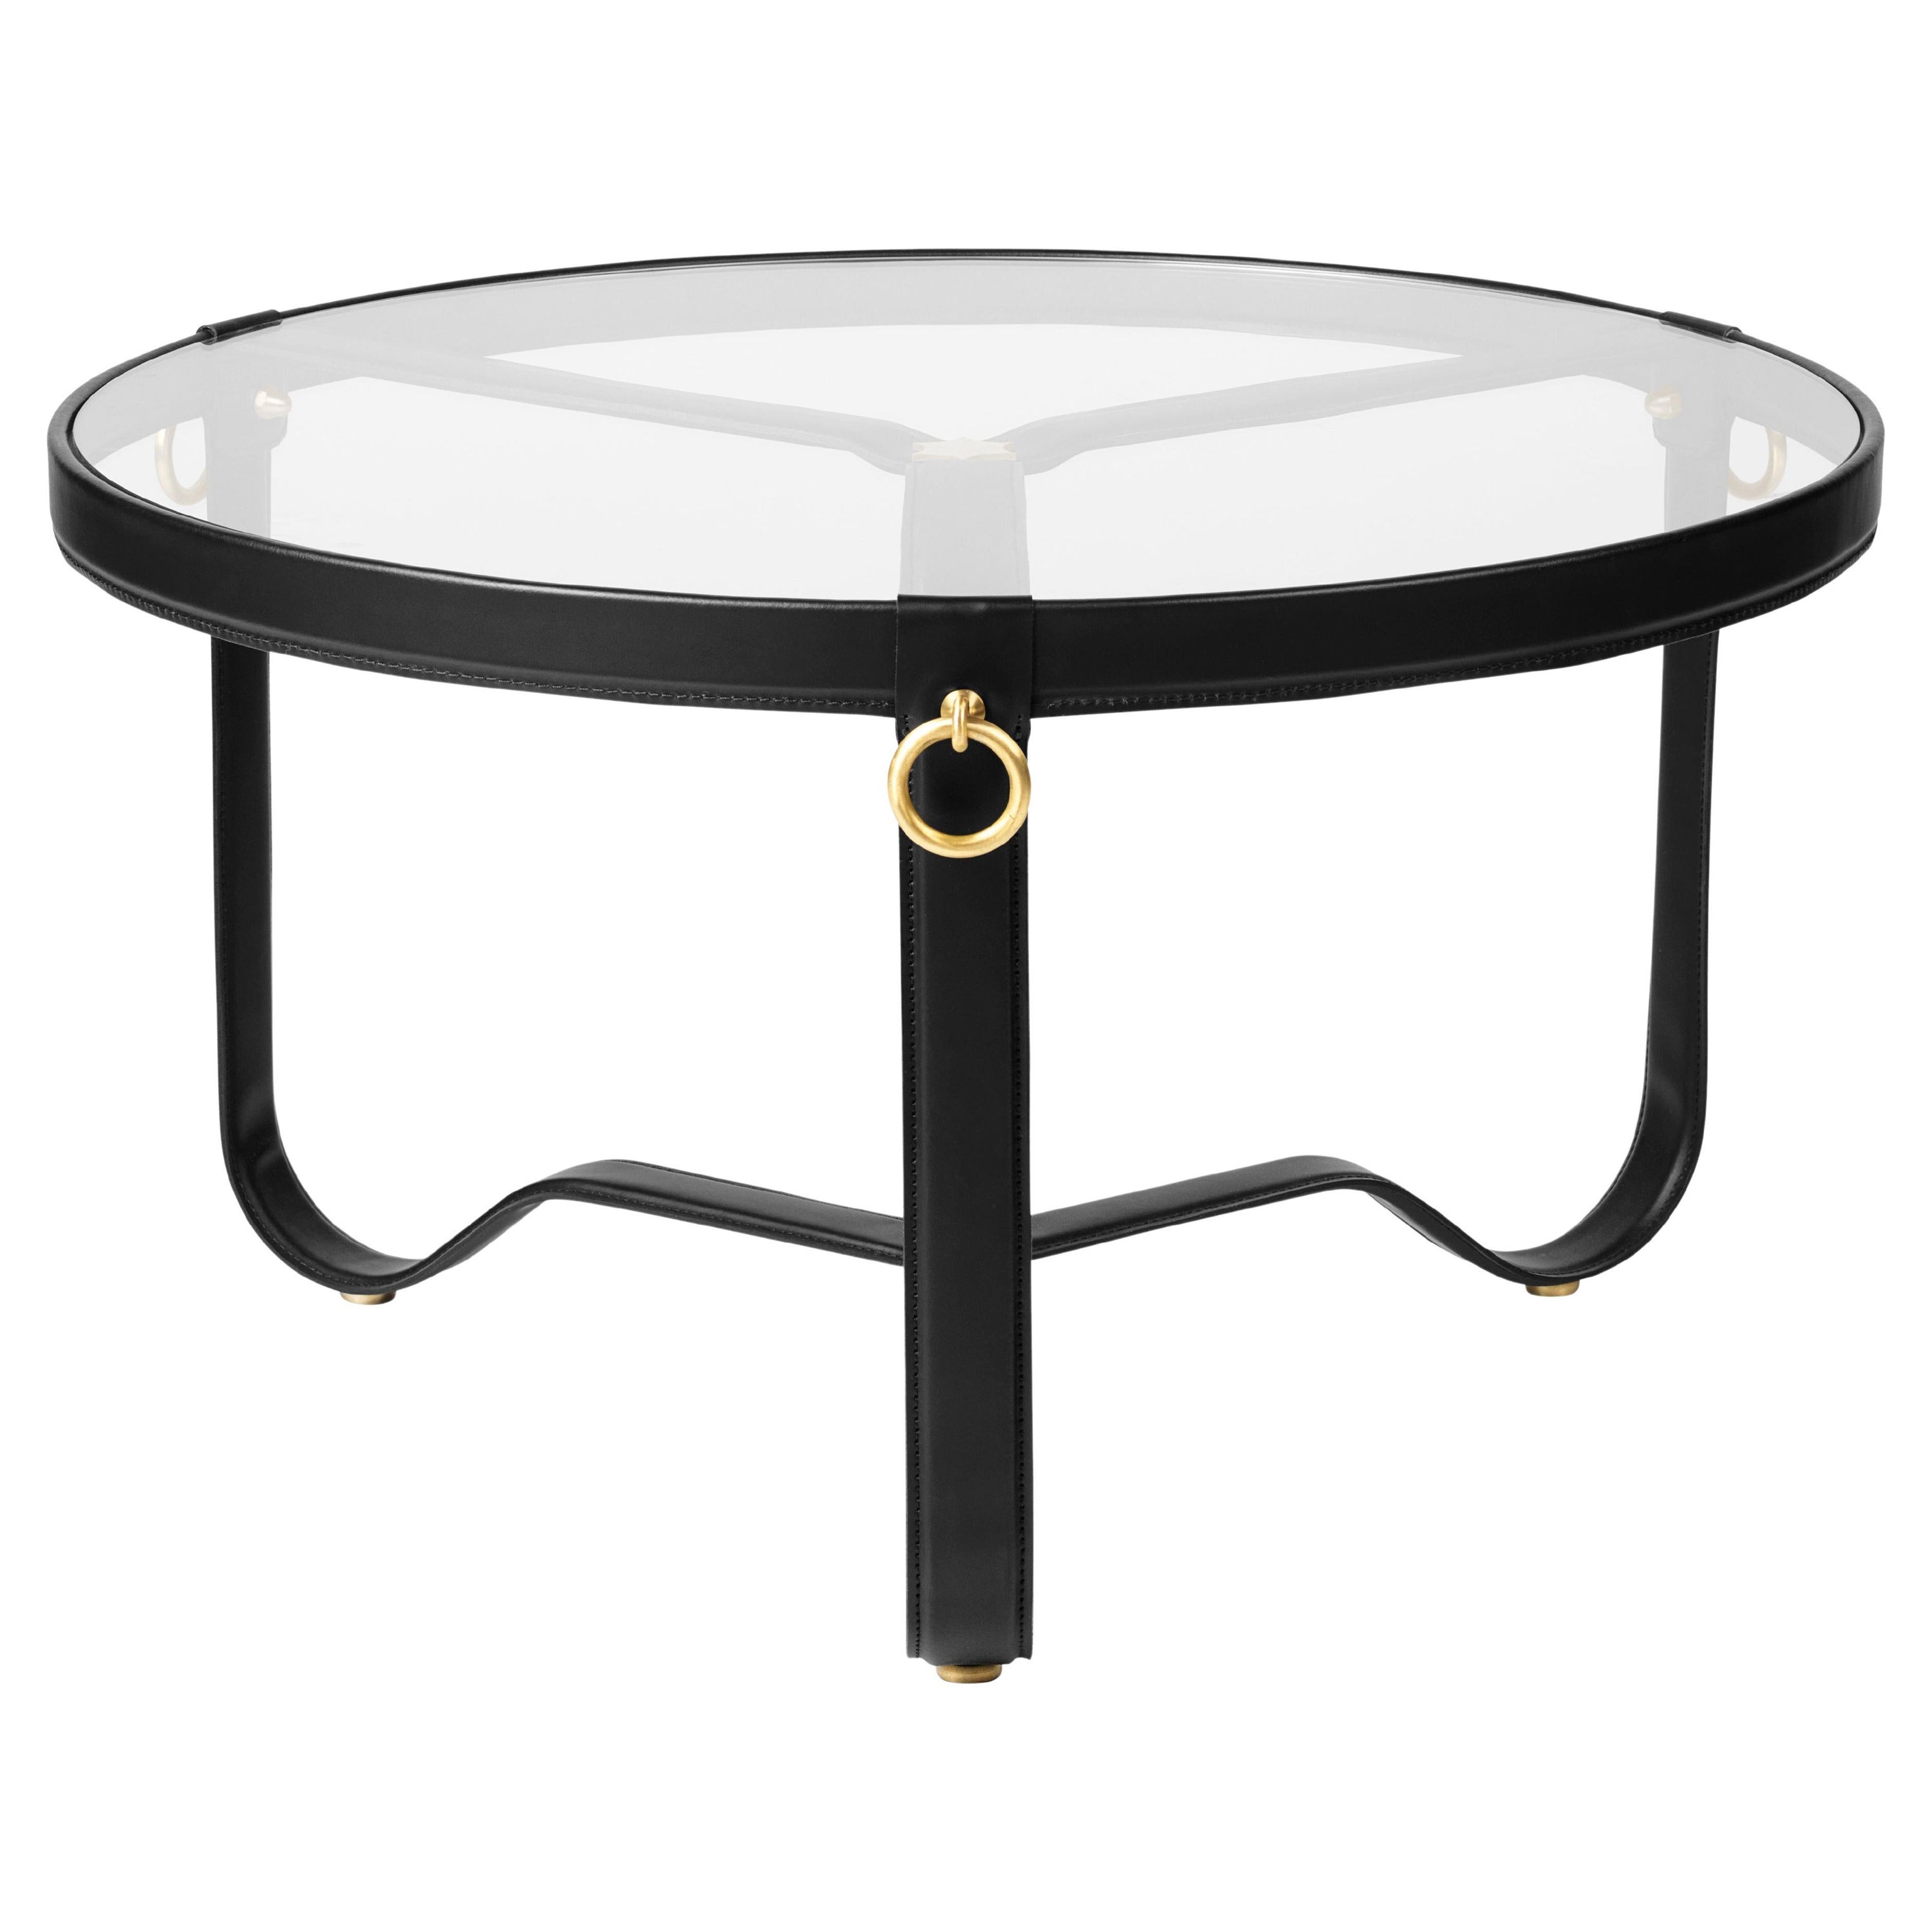 Adnet Coffee Table, Small - Black Leather - by Jacques Adnet for Gubi 